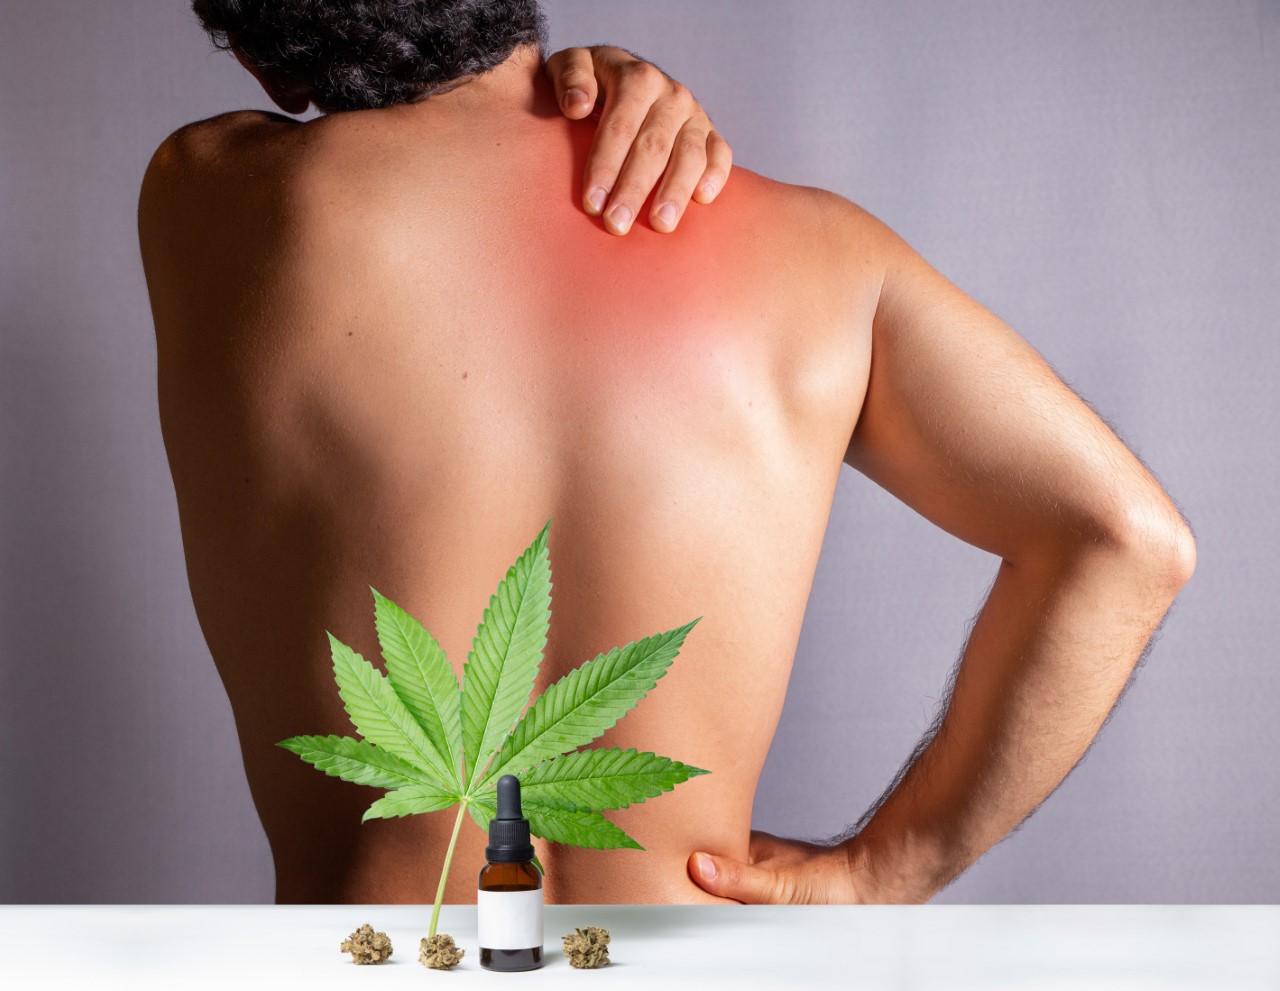 Man without shirt rubbing red spot on shoulder with Cannabis leaf imposed.